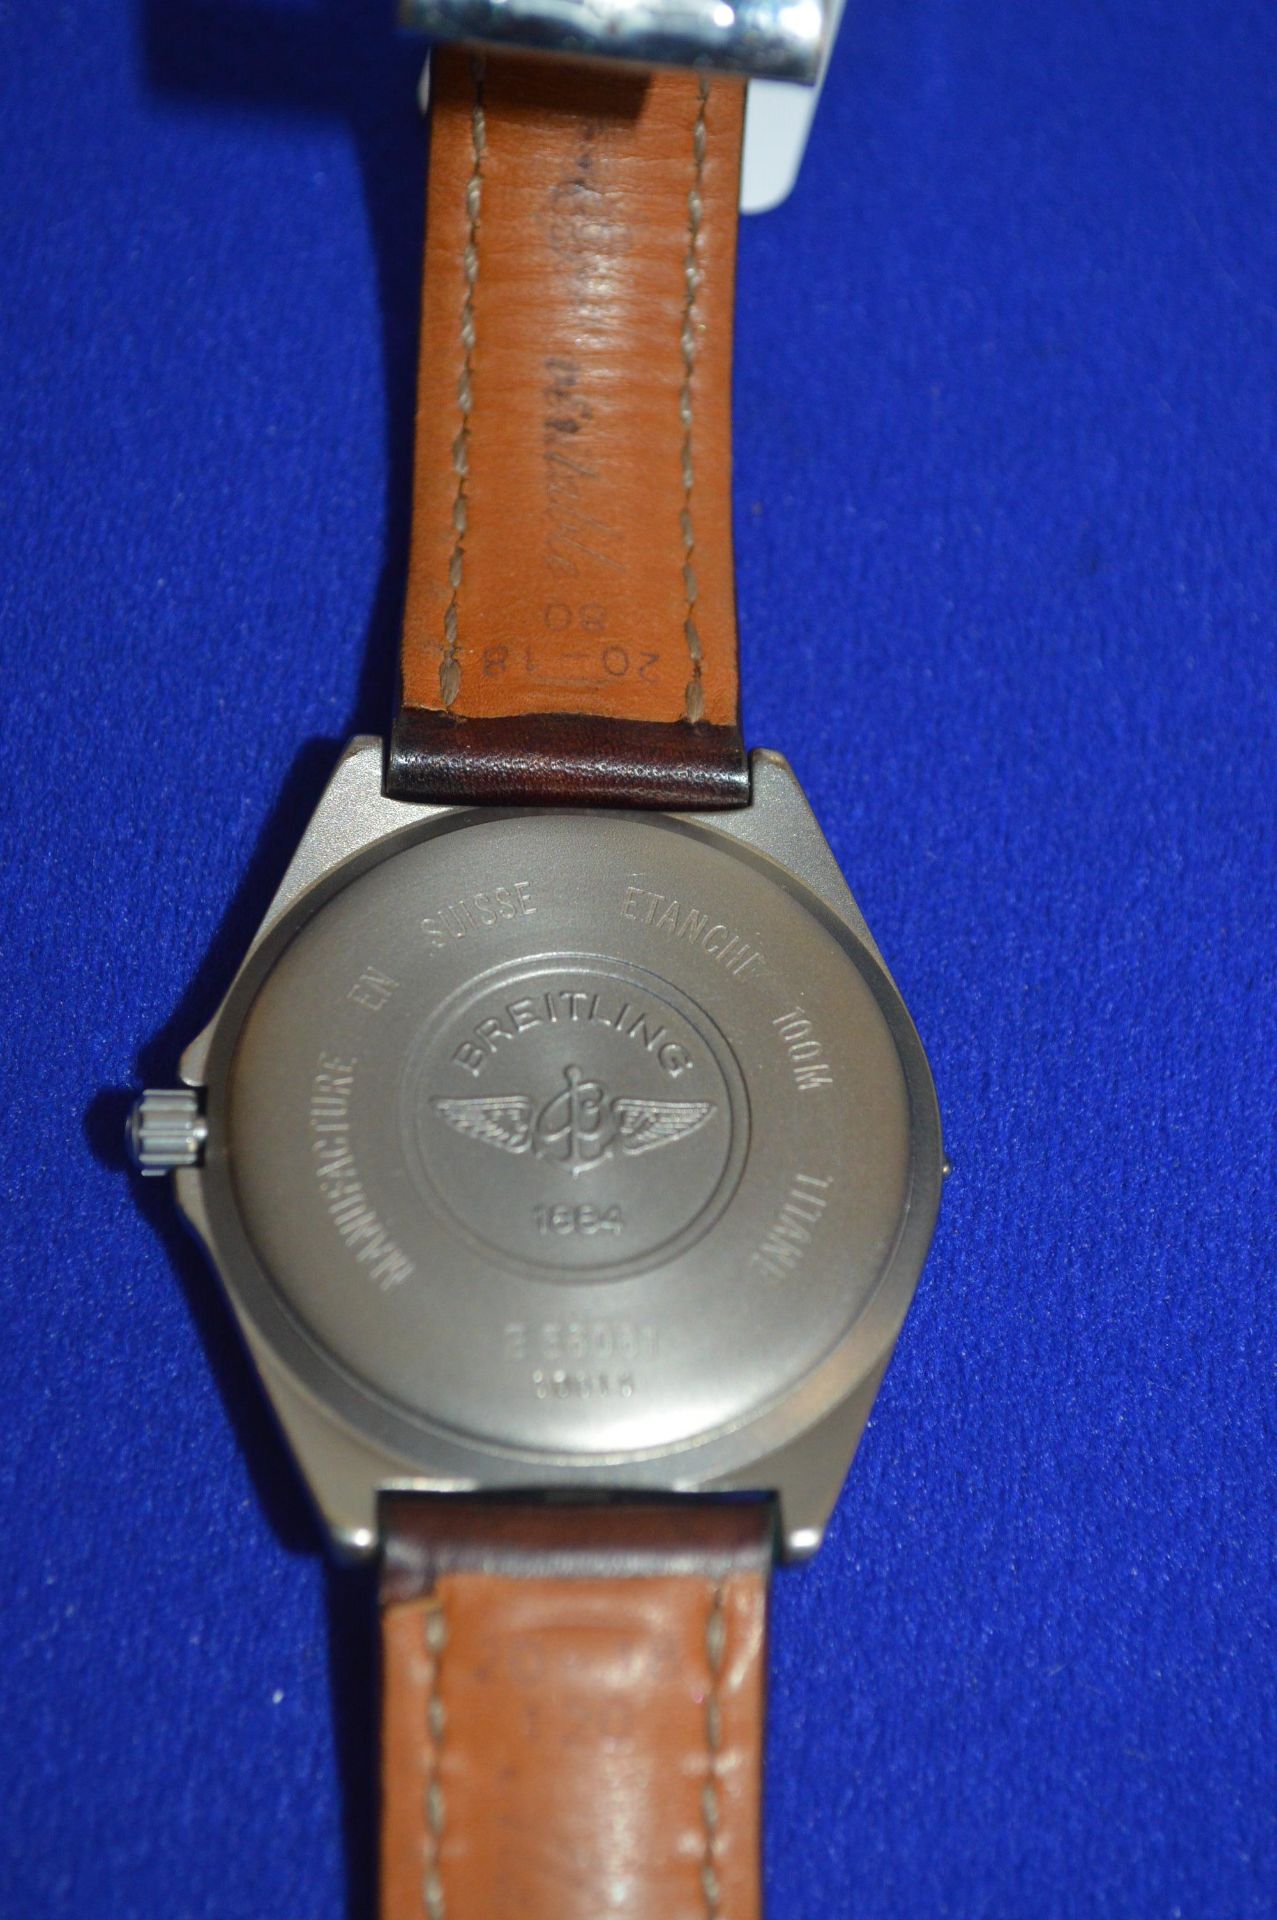 Breitling Aerospace Model: E56061 Gents Titanium Watch on Brown Leather Strap - Image 7 of 9